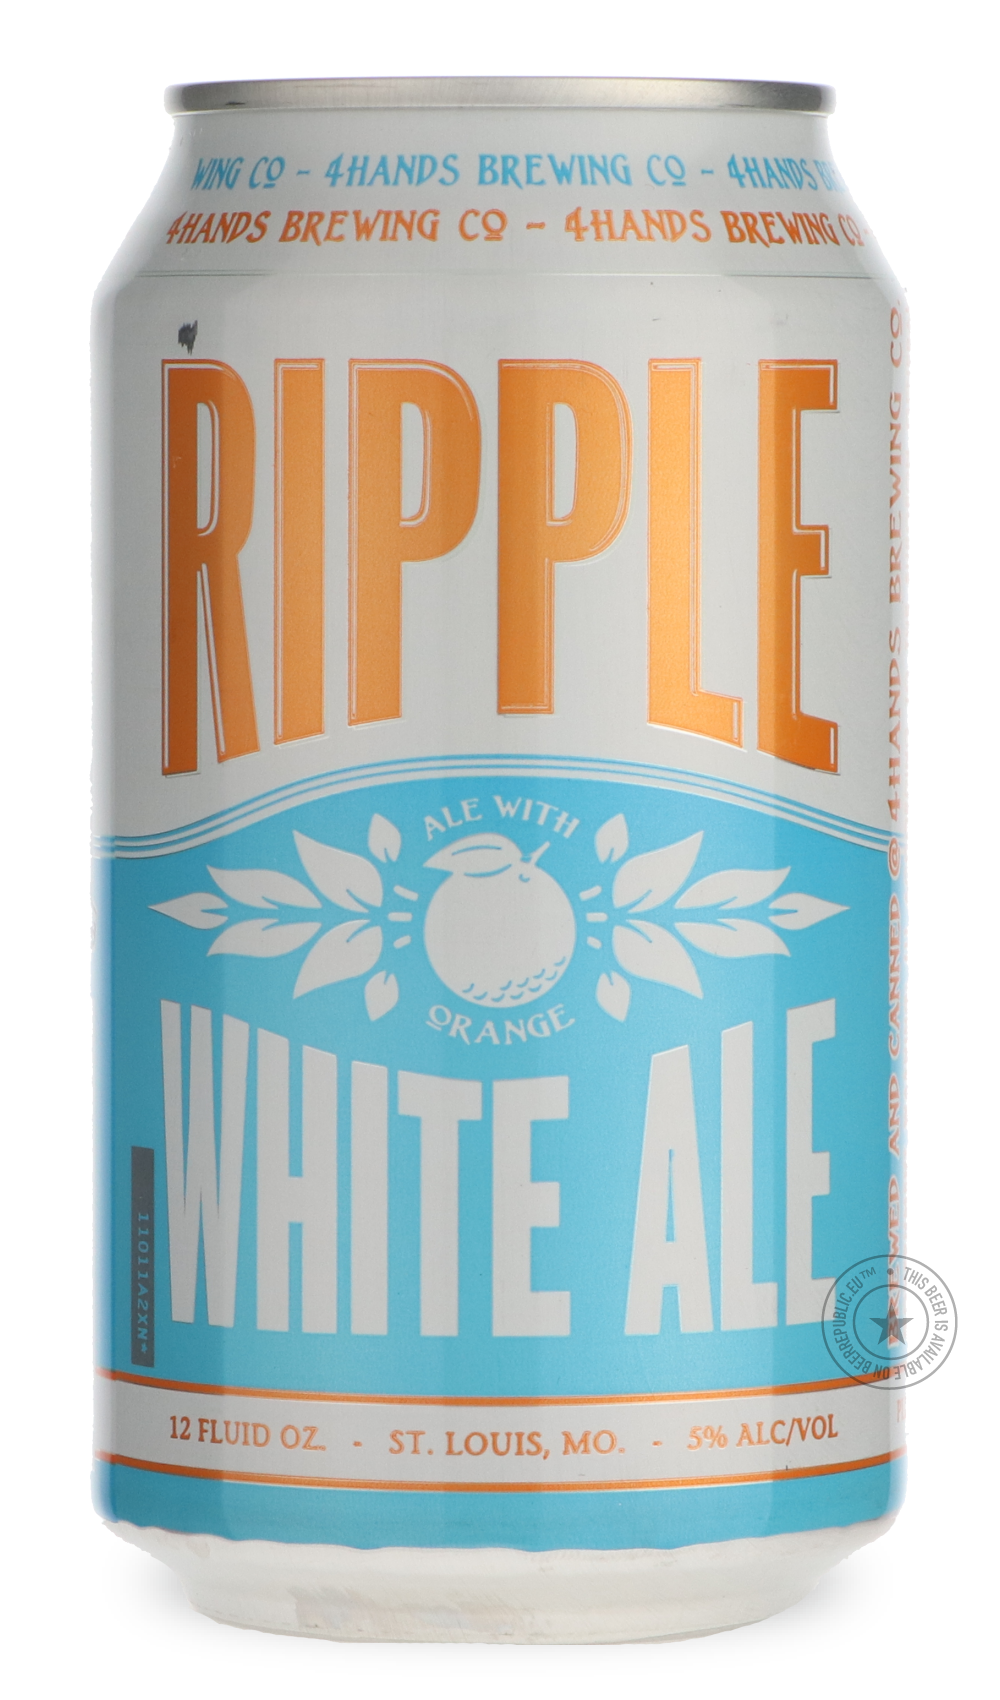 -4 Hands- Ripple White Ale-Pale- Only @ Beer Republic - The best online beer store for American & Canadian craft beer - Buy beer online from the USA and Canada - Bier online kopen - Amerikaans bier kopen - Craft beer store - Craft beer kopen - Amerikanisch bier kaufen - Bier online kaufen - Acheter biere online - IPA - Stout - Porter - New England IPA - Hazy IPA - Imperial Stout - Barrel Aged - Barrel Aged Imperial Stout - Brown - Dark beer - Blond - Blonde - Pilsner - Lager - Wheat - Weizen - Amber - Barle